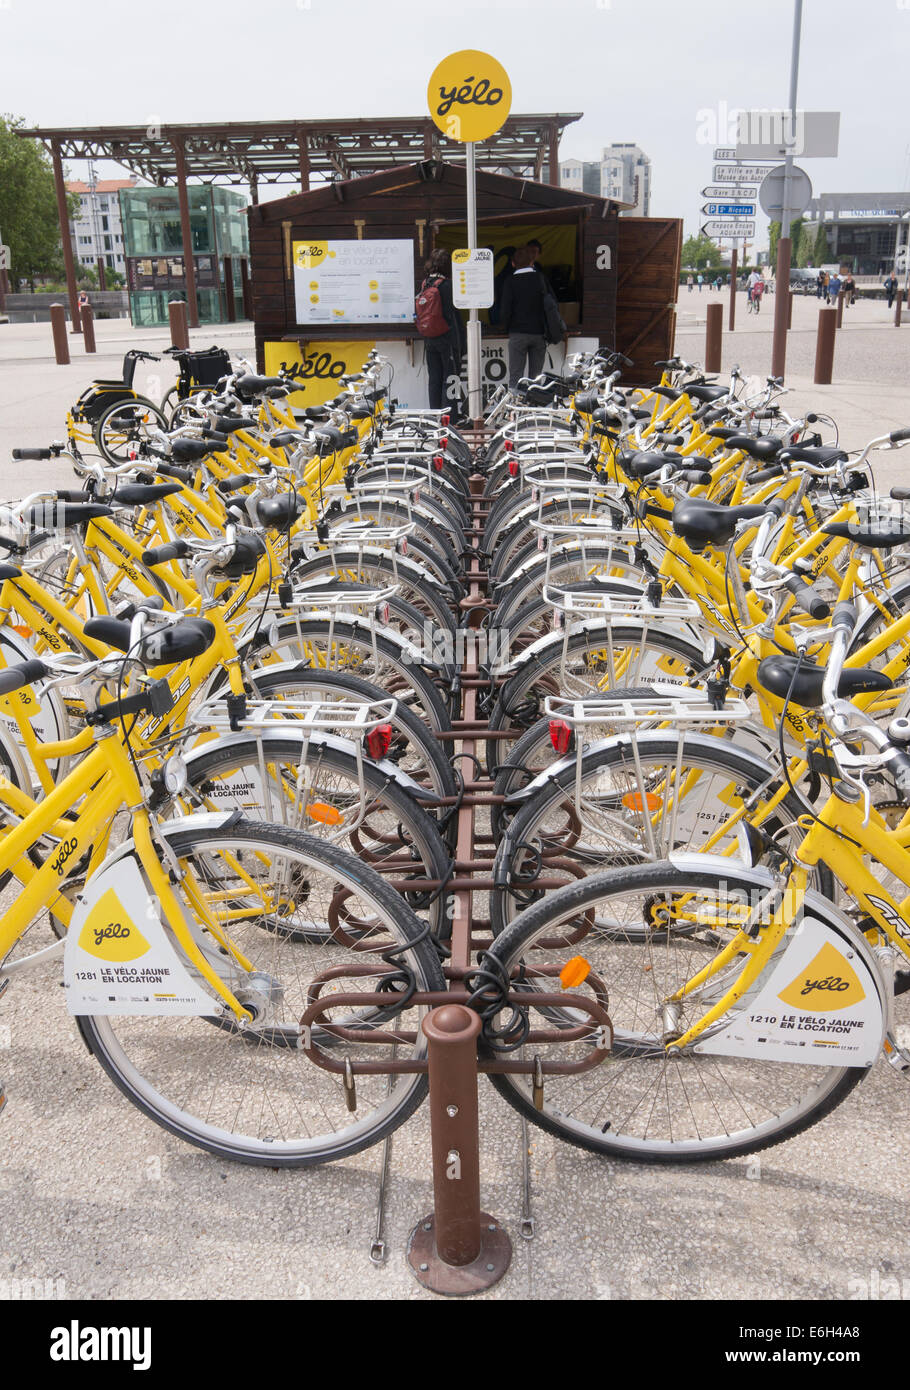 ylo-self-service-bicycle-hire-point-in-l